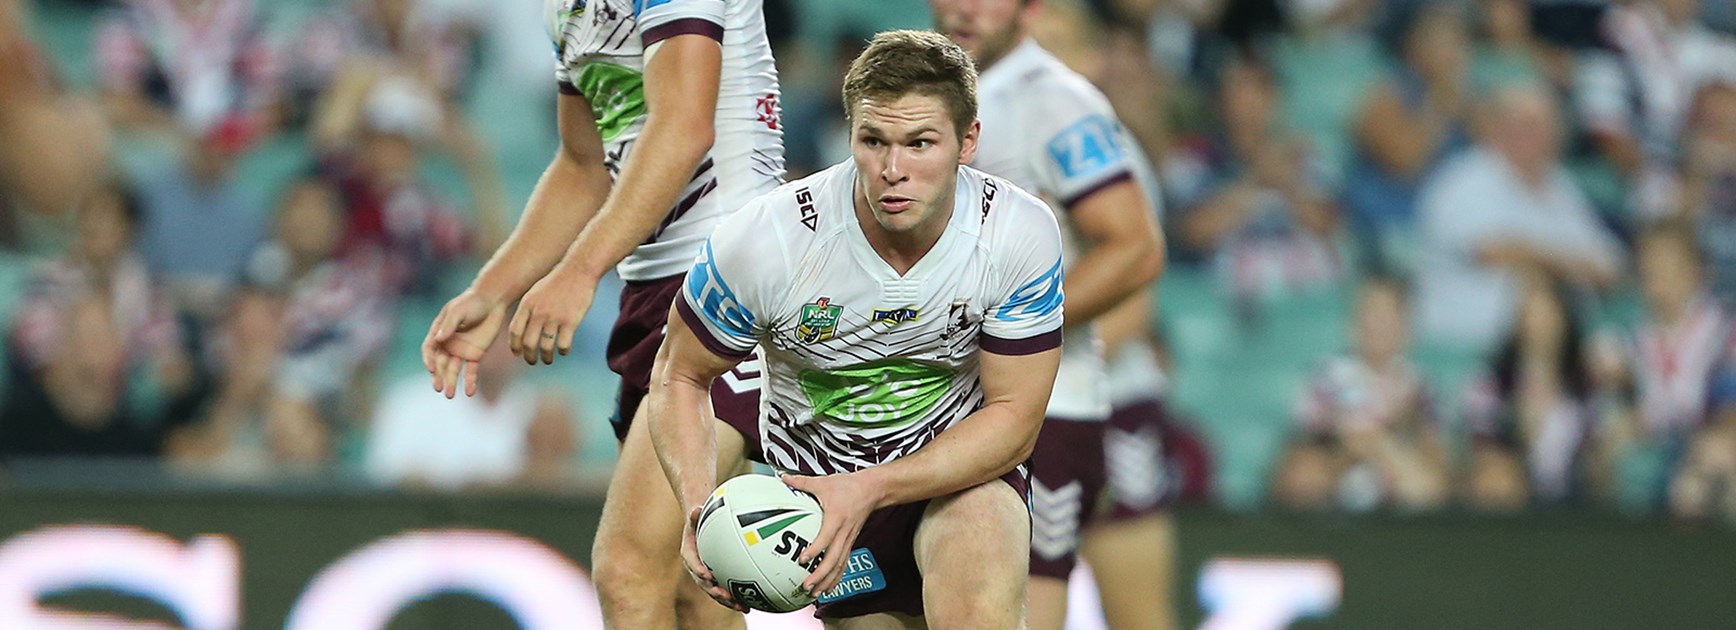 Sea Eagles hooker Matt Parcell in action against the Roosters in Round 4 of the Telstra Premiership.